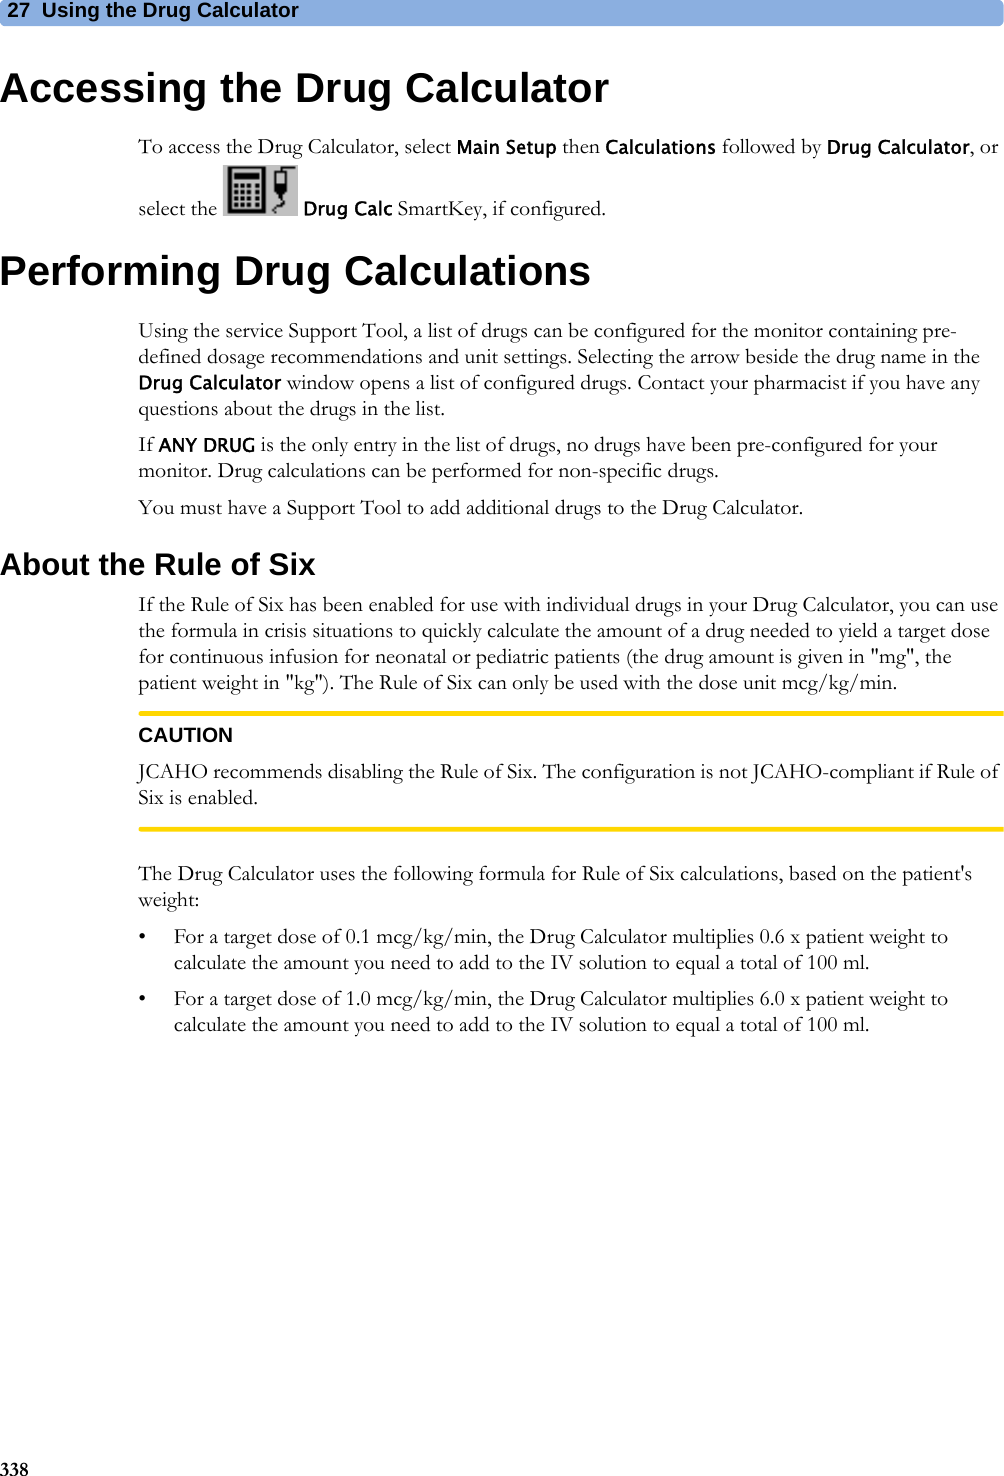 27 Using the Drug Calculator338Accessing the Drug CalculatorTo access the Drug Calculator, select Main Setup then Calculations followed by Drug Calculator, or select the   Drug Calc SmartKey, if configured.Performing Drug CalculationsUsing the service Support Tool, a list of drugs can be configured for the monitor containing pre-defined dosage recommendations and unit settings. Selecting the arrow beside the drug name in the Drug Calculator window opens a list of configured drugs. Contact your pharmacist if you have any questions about the drugs in the list.If ANY DRUG is the only entry in the list of drugs, no drugs have been pre-configured for your monitor. Drug calculations can be performed for non-specific drugs.You must have a Support Tool to add additional drugs to the Drug Calculator.About the Rule of SixIf the Rule of Six has been enabled for use with individual drugs in your Drug Calculator, you can use the formula in crisis situations to quickly calculate the amount of a drug needed to yield a target dose for continuous infusion for neonatal or pediatric patients (the drug amount is given in &quot;mg&quot;, the patient weight in &quot;kg&quot;). The Rule of Six can only be used with the dose unit mcg/kg/min.CAUTIONJCAHO recommends disabling the Rule of Six. The configuration is not JCAHO-compliant if Rule of Six is enabled.The Drug Calculator uses the following formula for Rule of Six calculations, based on the patient&apos;s weight:• For a target dose of 0.1 mcg/kg/min, the Drug Calculator multiplies 0.6 x patient weight to calculate the amount you need to add to the IV solution to equal a total of 100 ml.• For a target dose of 1.0 mcg/kg/min, the Drug Calculator multiplies 6.0 x patient weight to calculate the amount you need to add to the IV solution to equal a total of 100 ml.